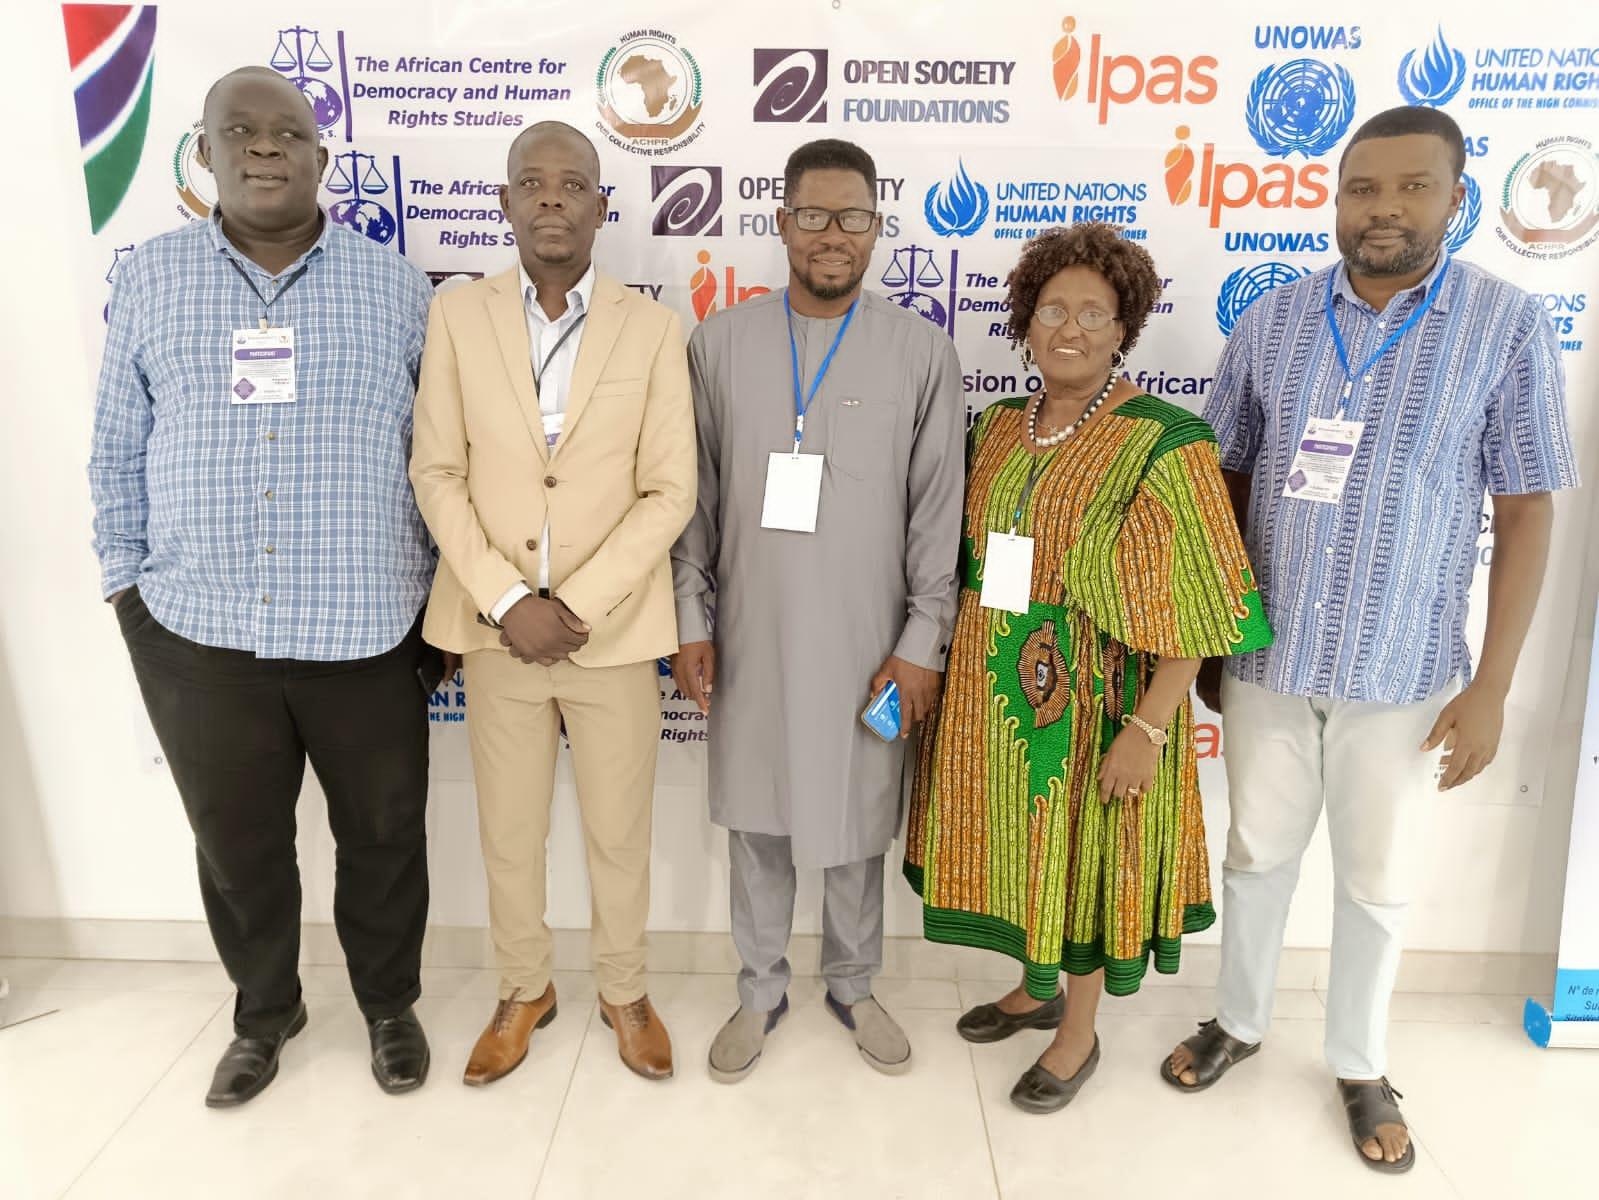 The NGO forum, which is facilitated by the Africa Center for Democracy and Human Rights Studies (ACDHRS), is a mechanism that discusses issues of human rights in Africa and develop recommendations. Photo: ALCINET/F. Samari